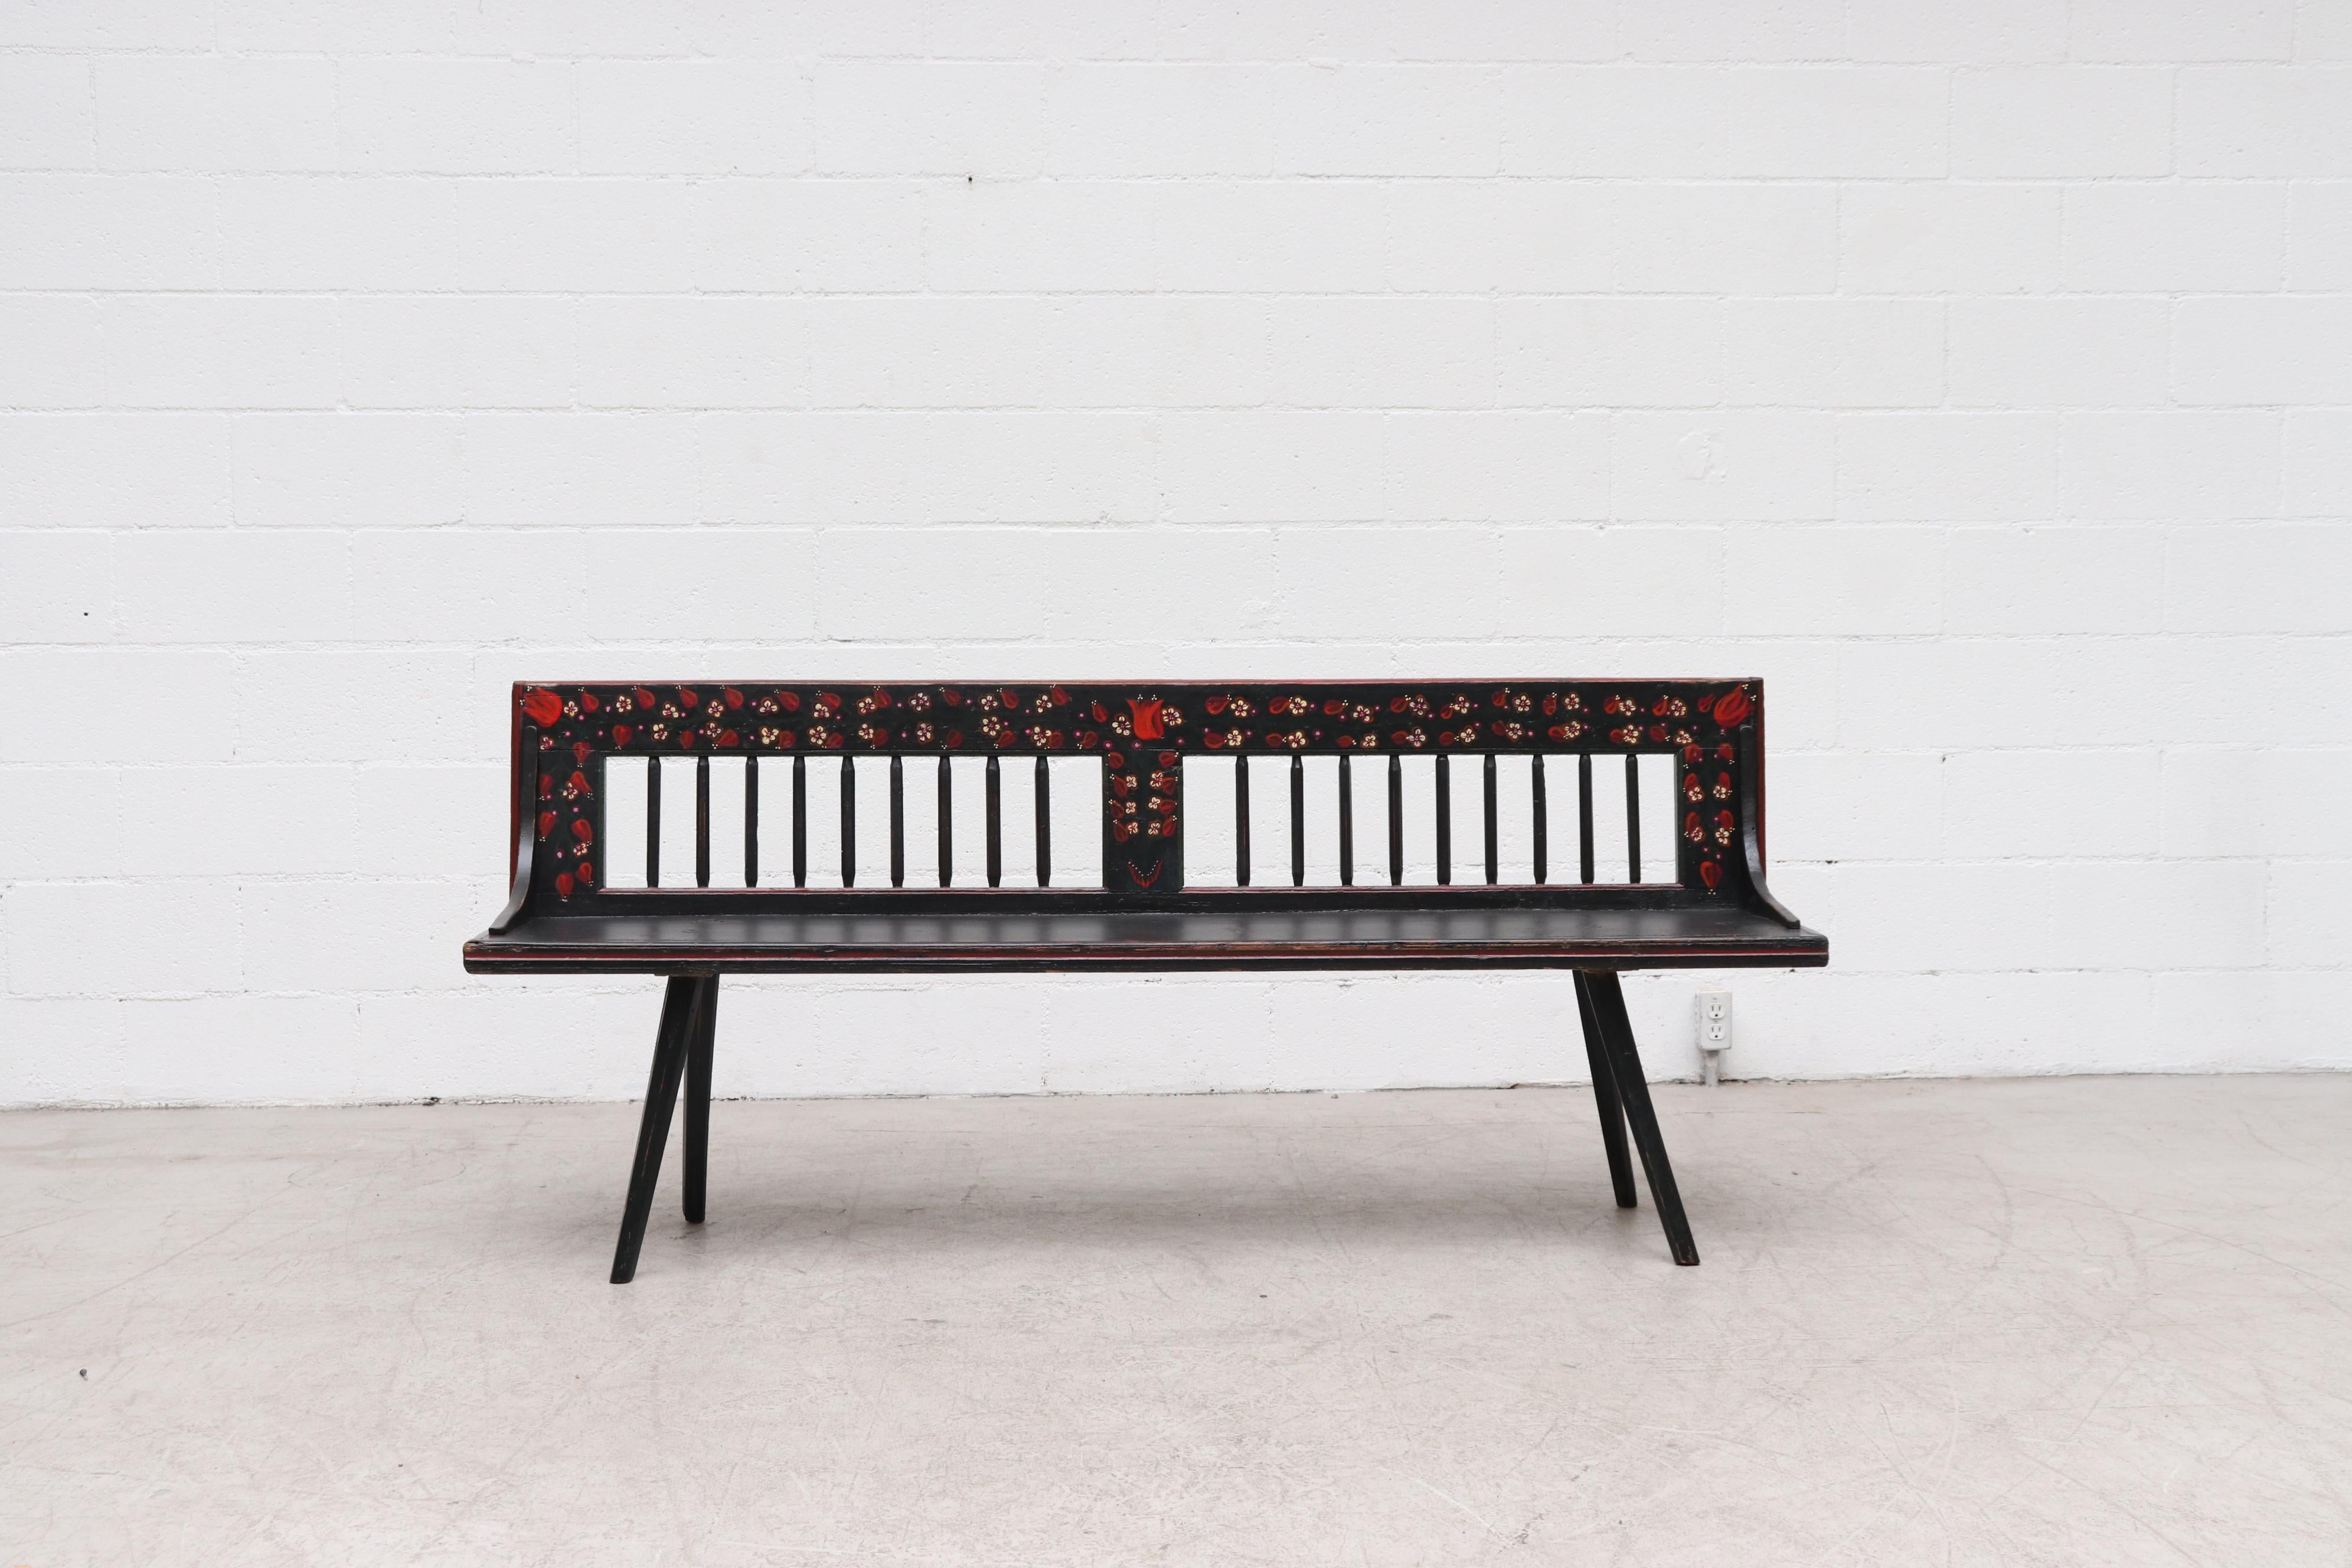 Handsome midcentury Dutch spindle back wood bench with hand painted black wood and ornate flower decoration. In very original condition with wear and scratches consistent with its age and use.